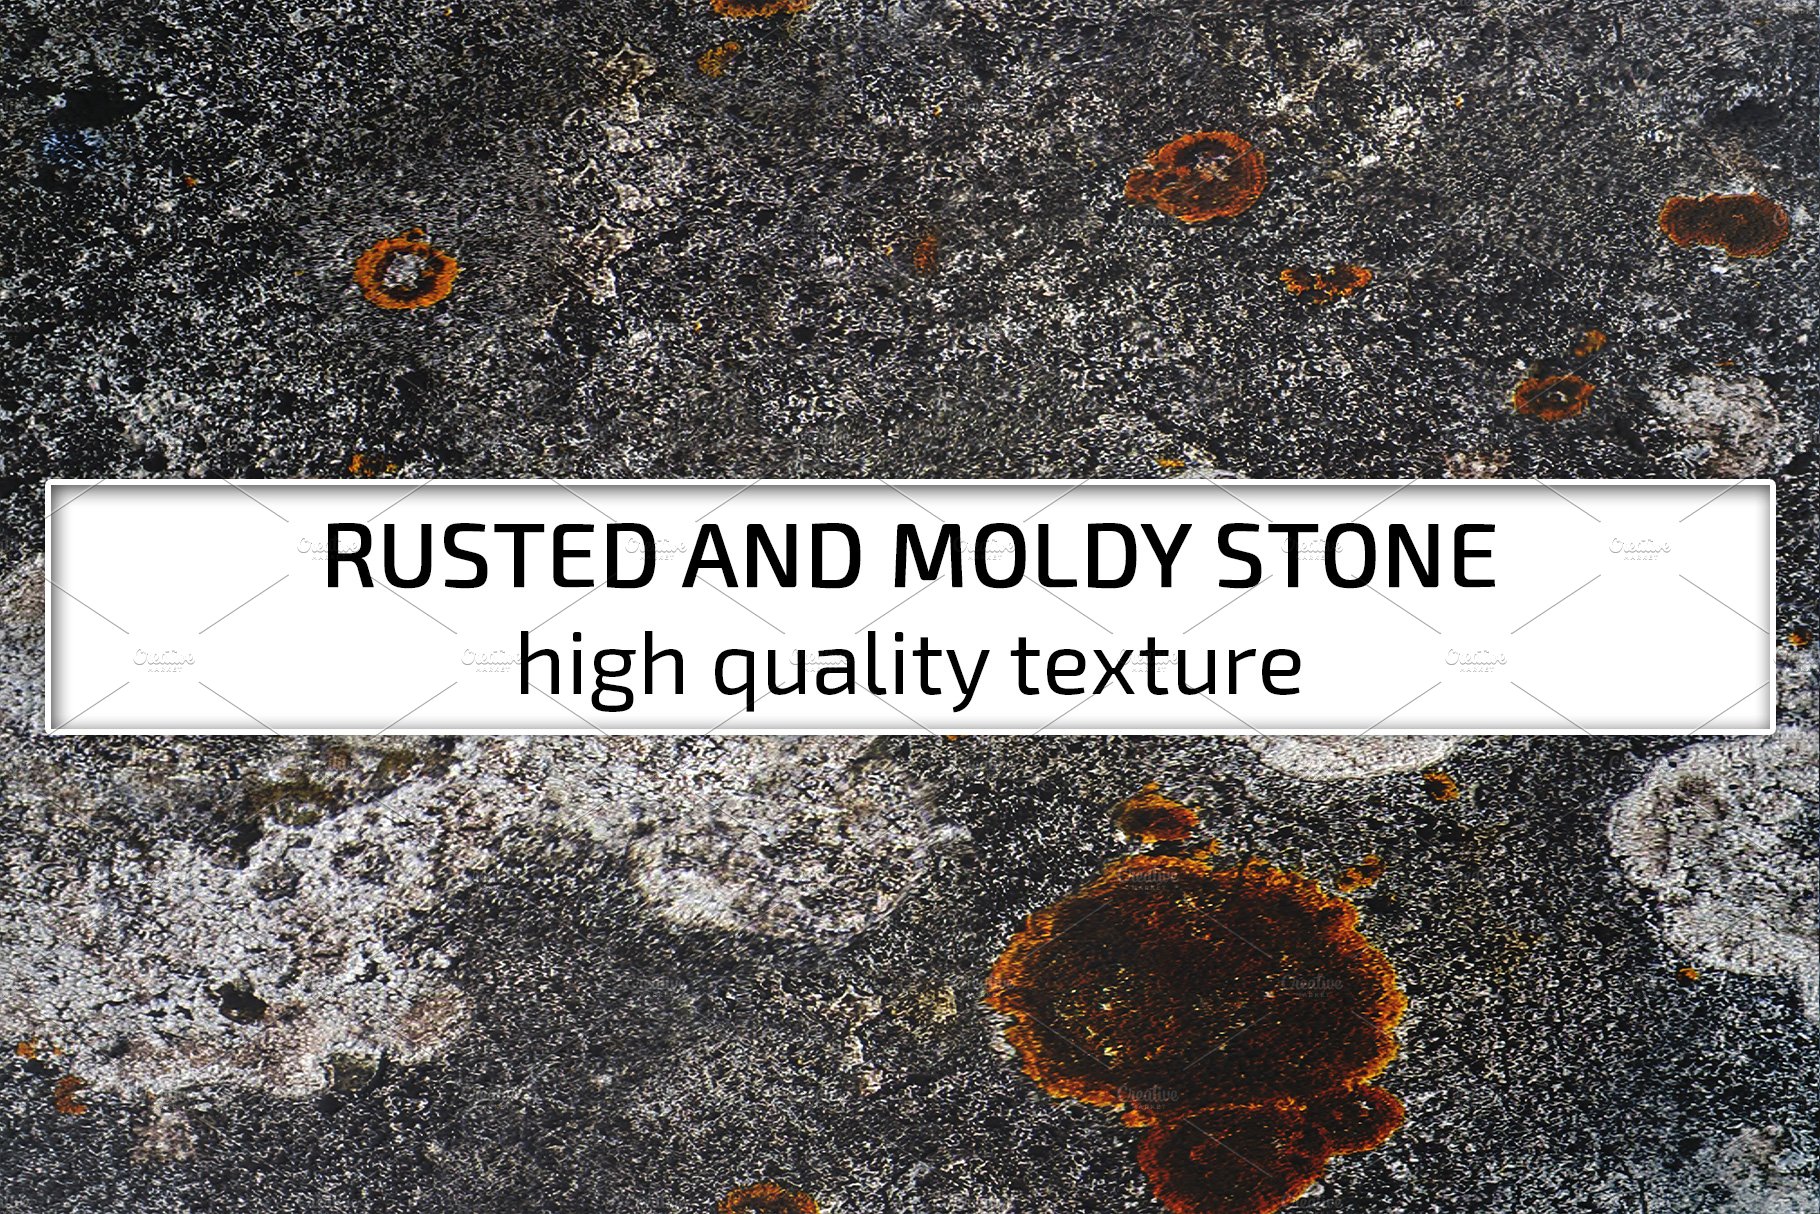 Rusted and moldy stone cover image.